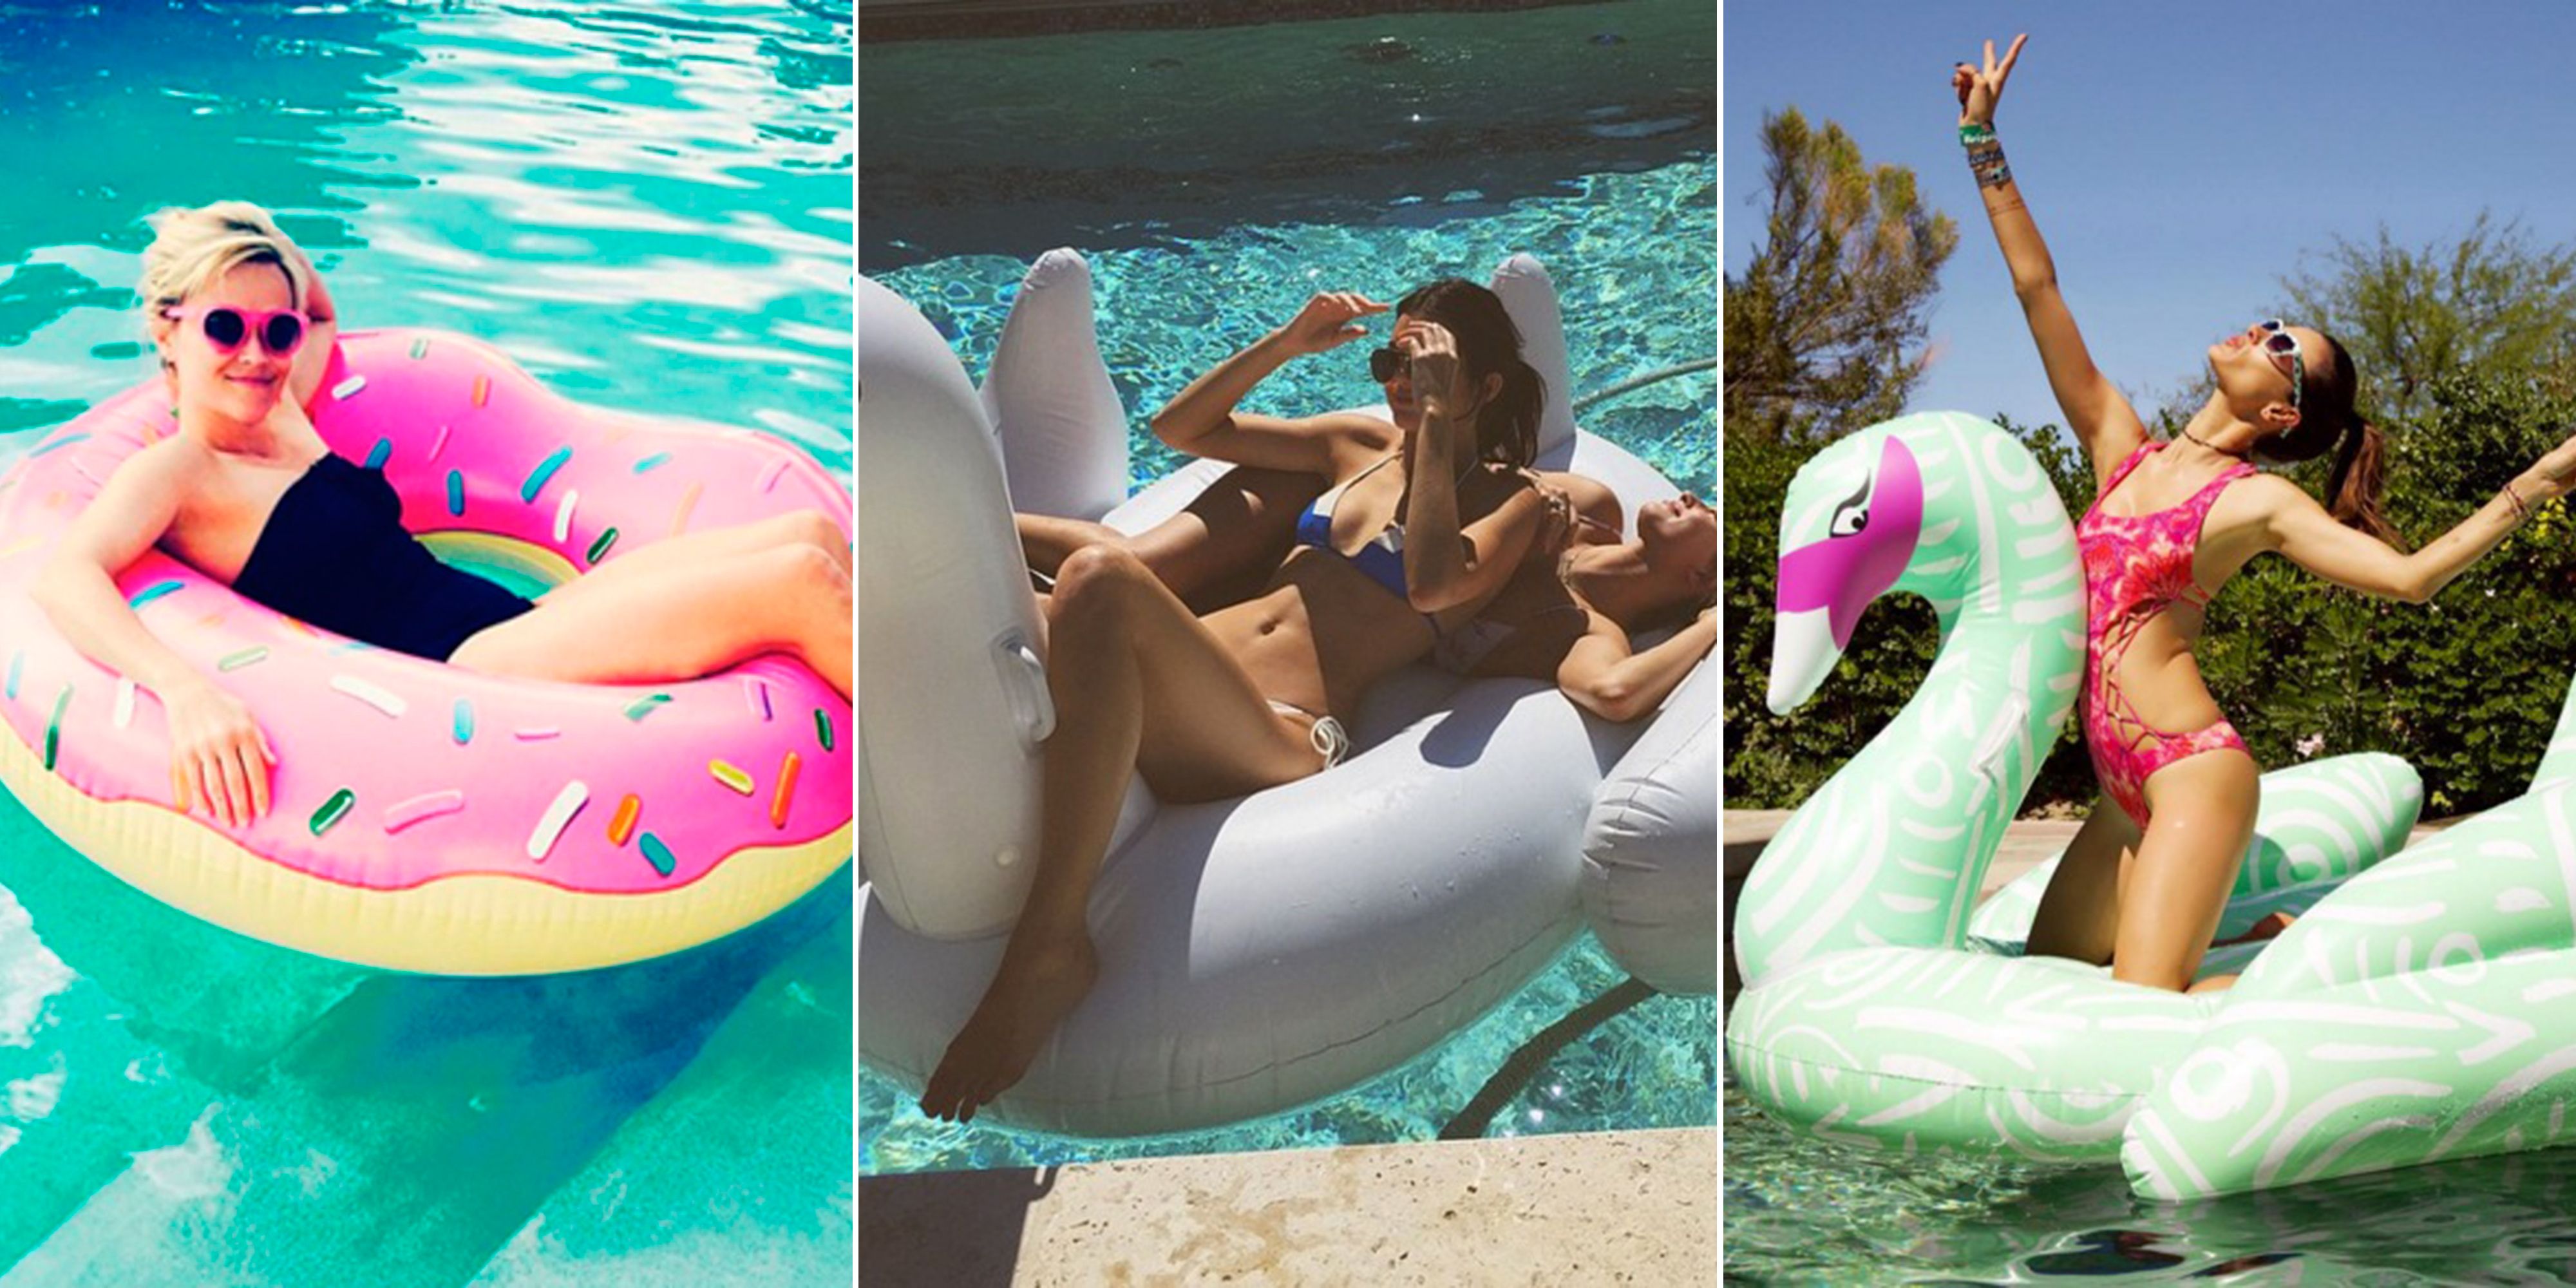 best pool inflatables